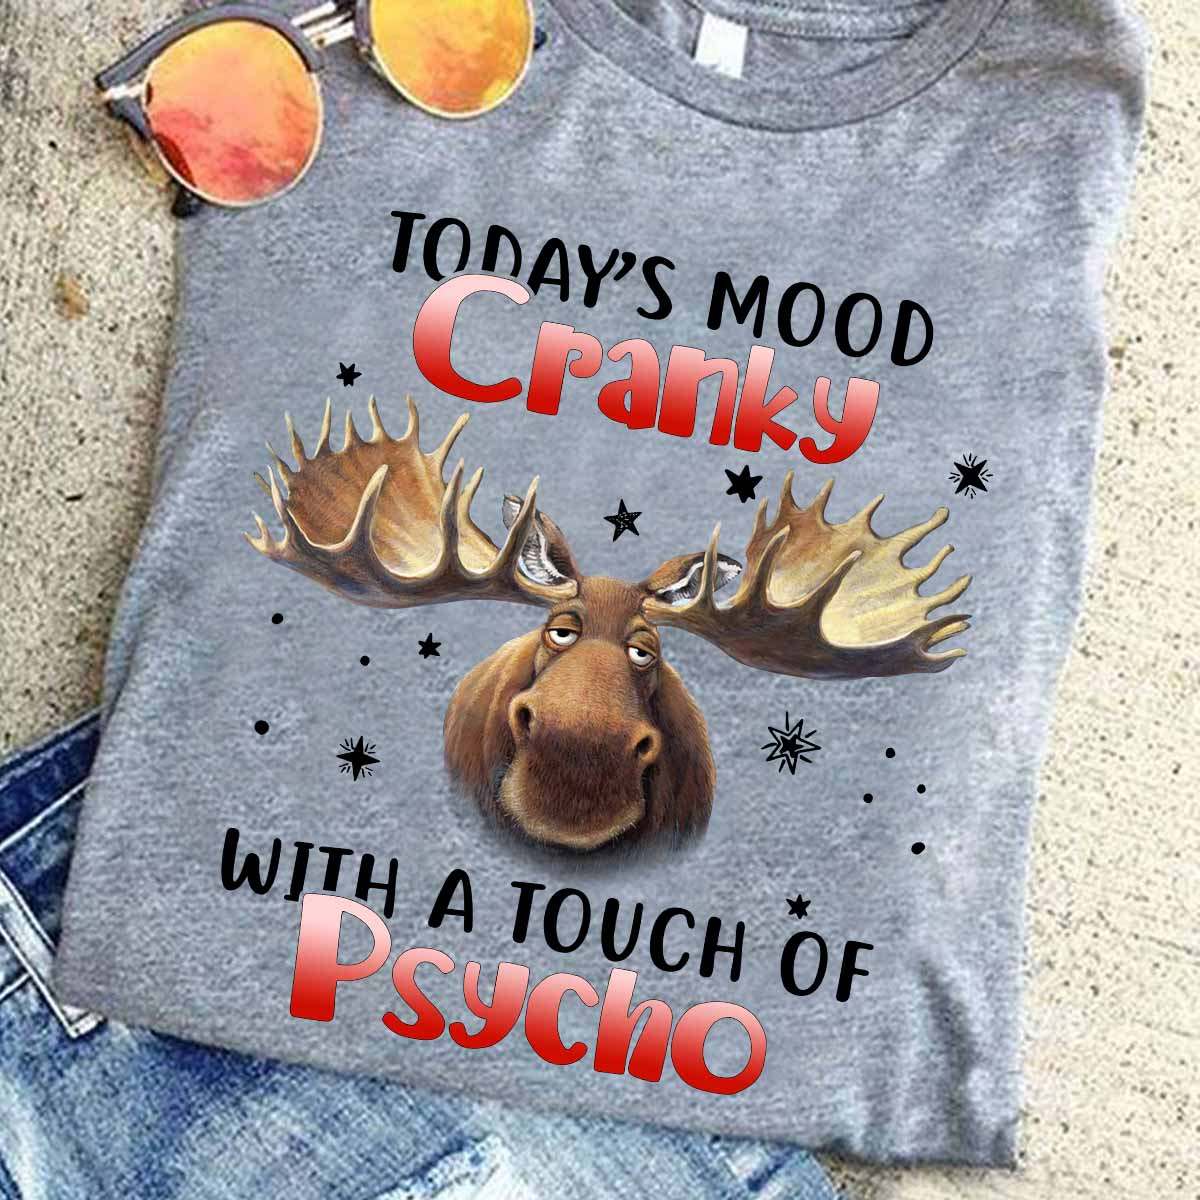 Today's mood cranky with a touch of Psycho - Cranky moose